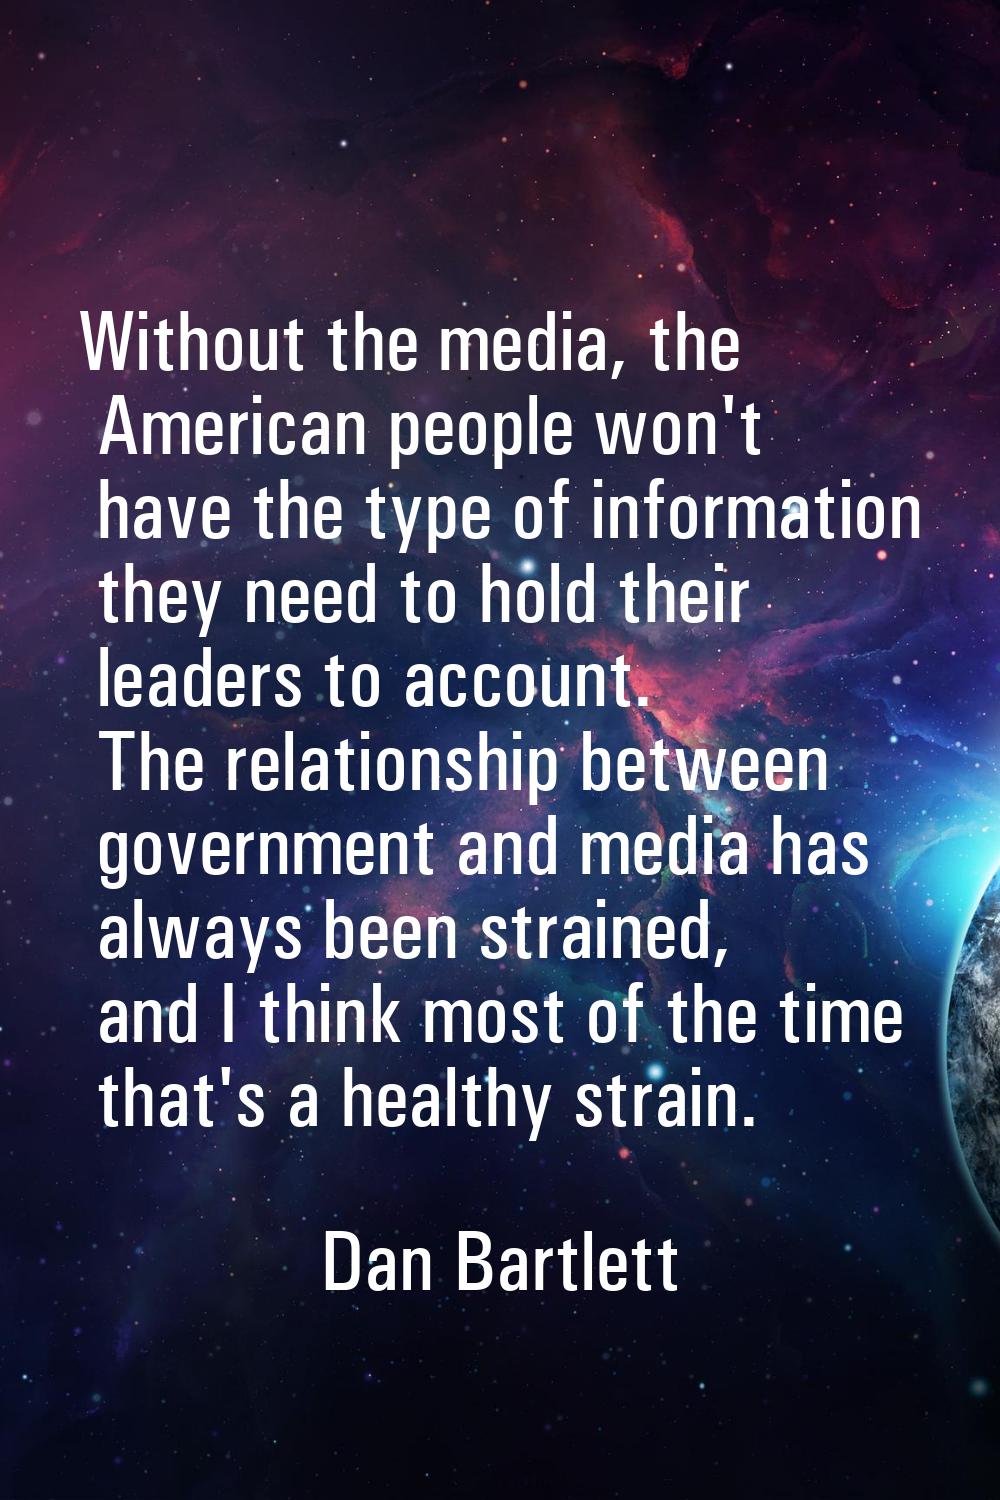 Without the media, the American people won't have the type of information they need to hold their l